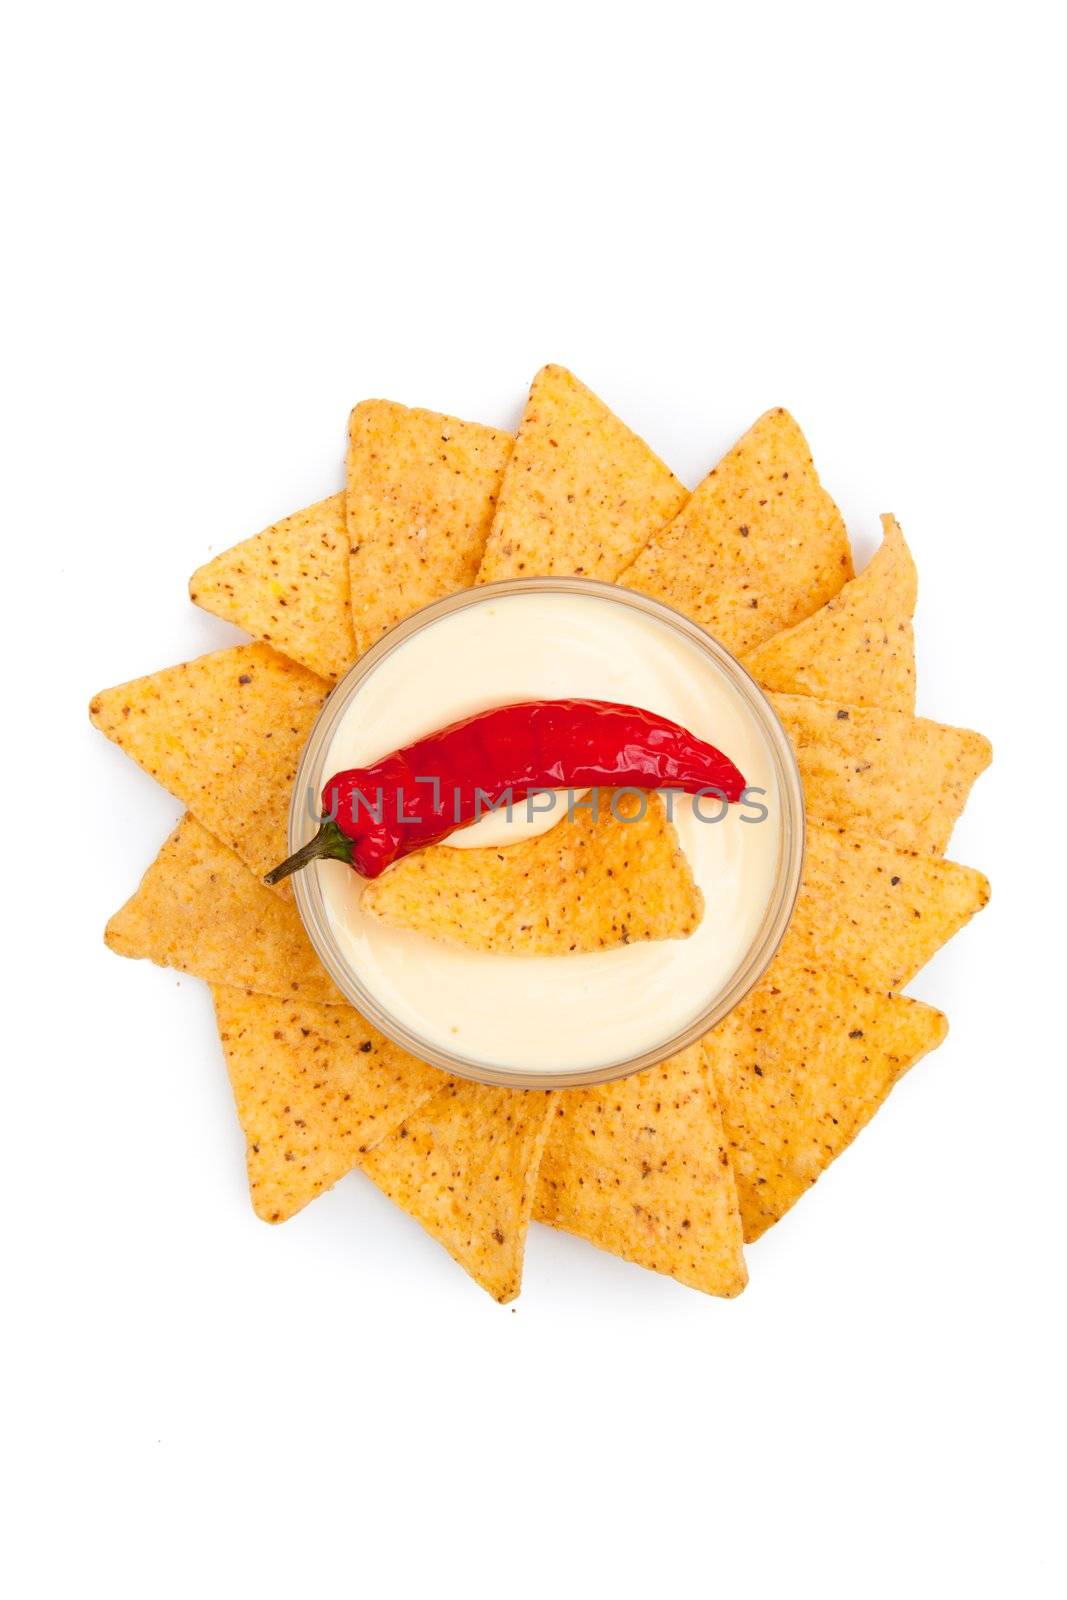 Pepper and nacho dipped into a bowl surrounded by nachos by Wavebreakmedia